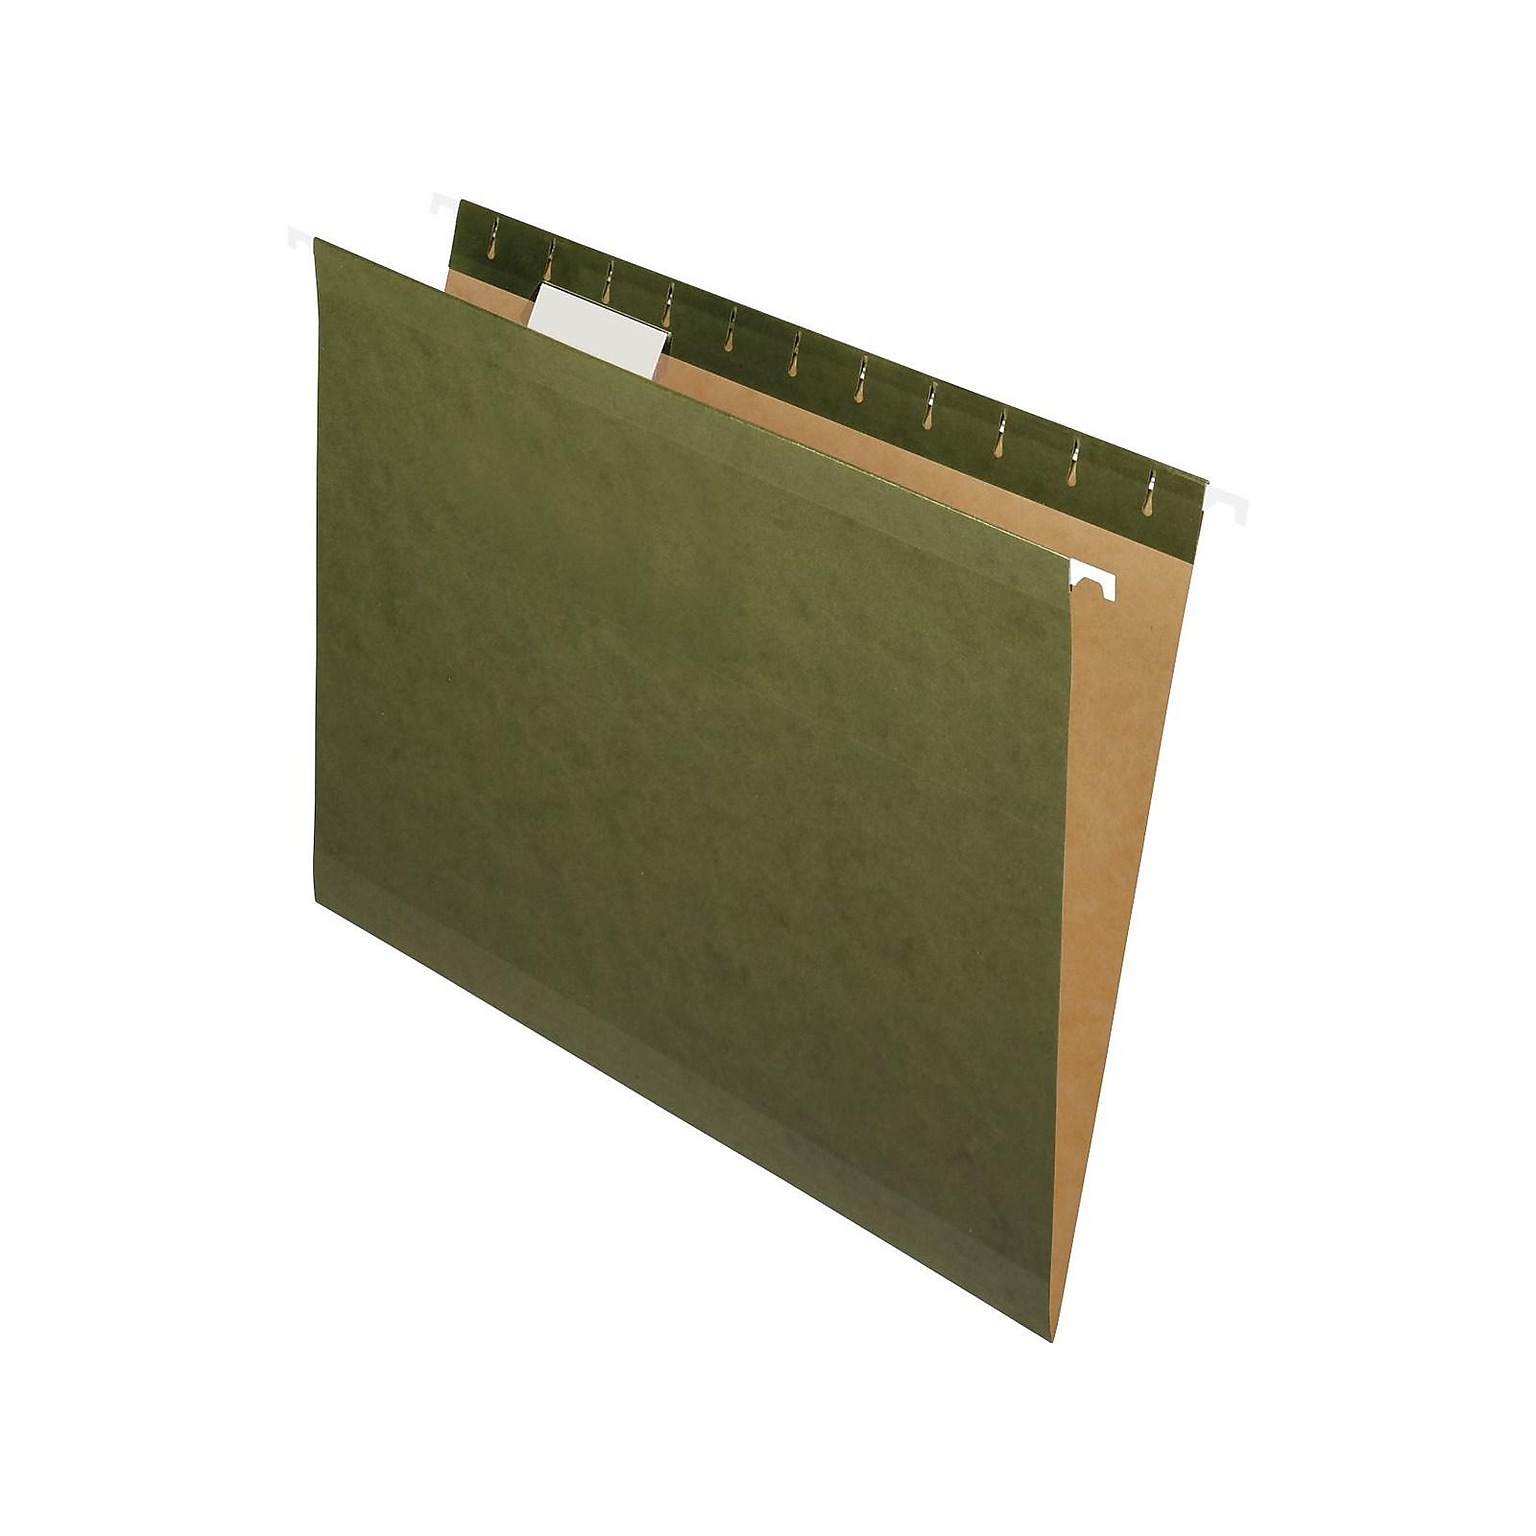 Pendaflex 100% Recycled Hanging File Folders, Letter Size, Standard Green, 25/Box (PFX RCY4152 1/5 SGR)